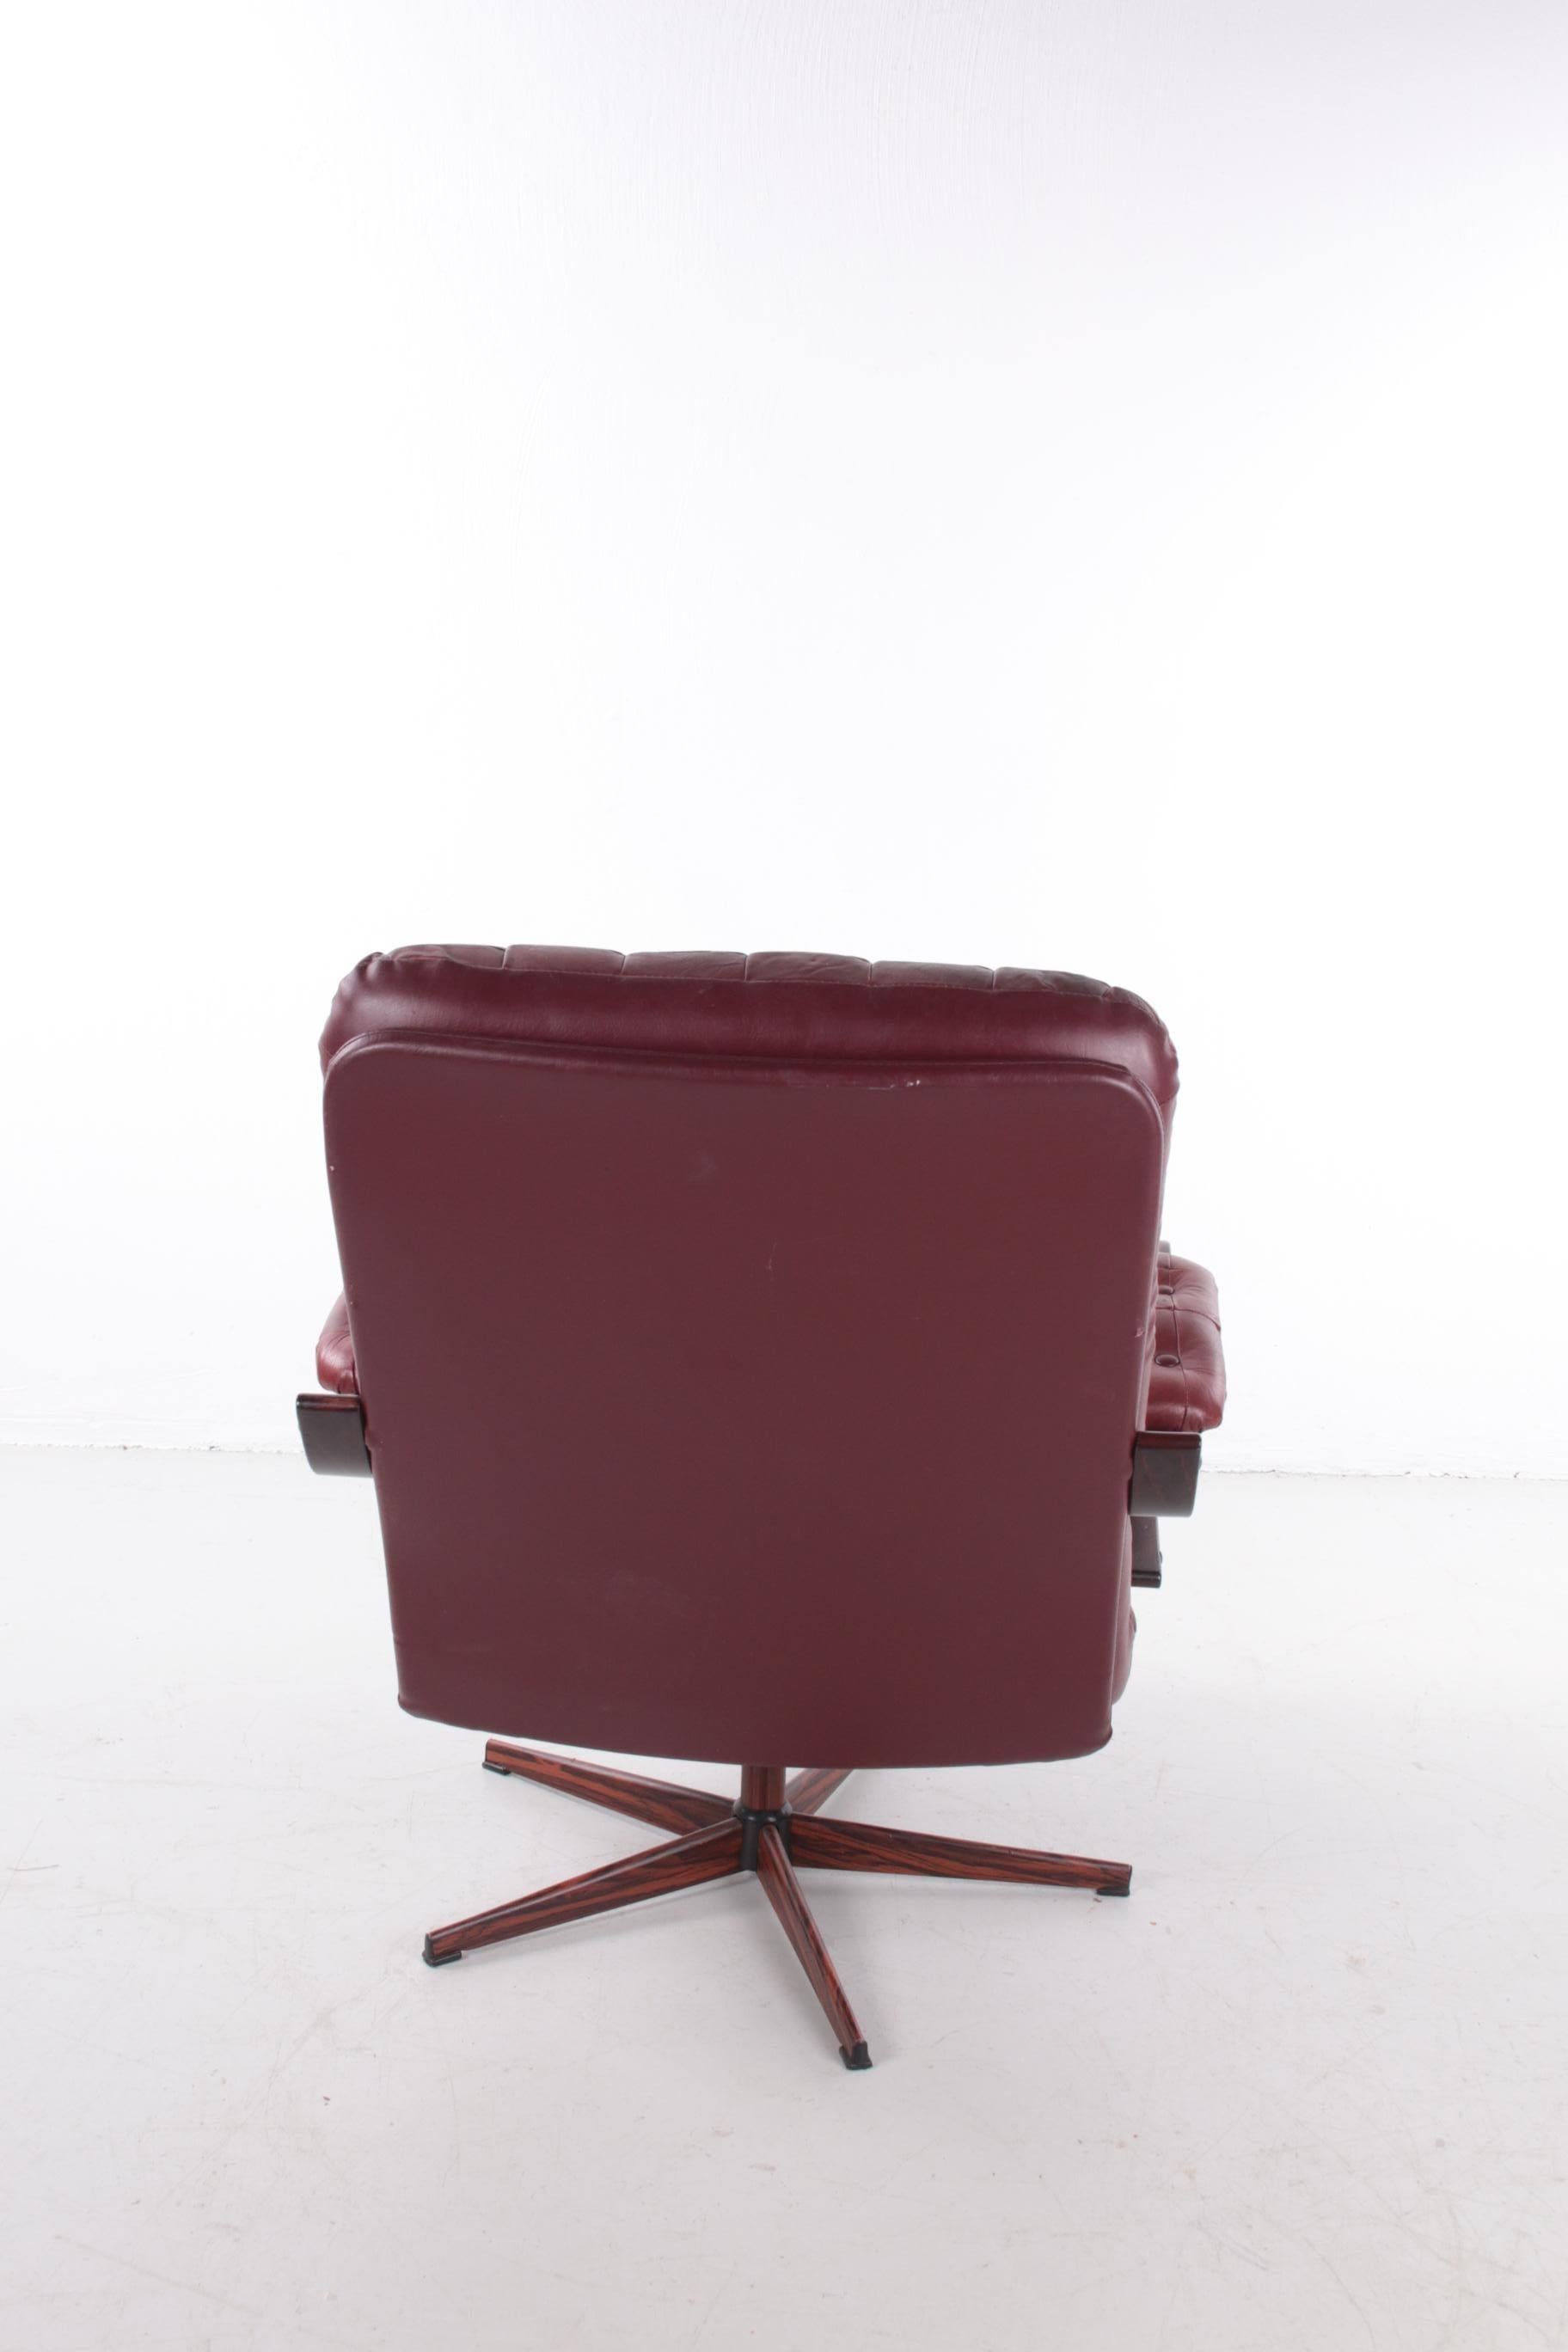 Industrial Swedish Red Leather Patches Armchair Rotatable